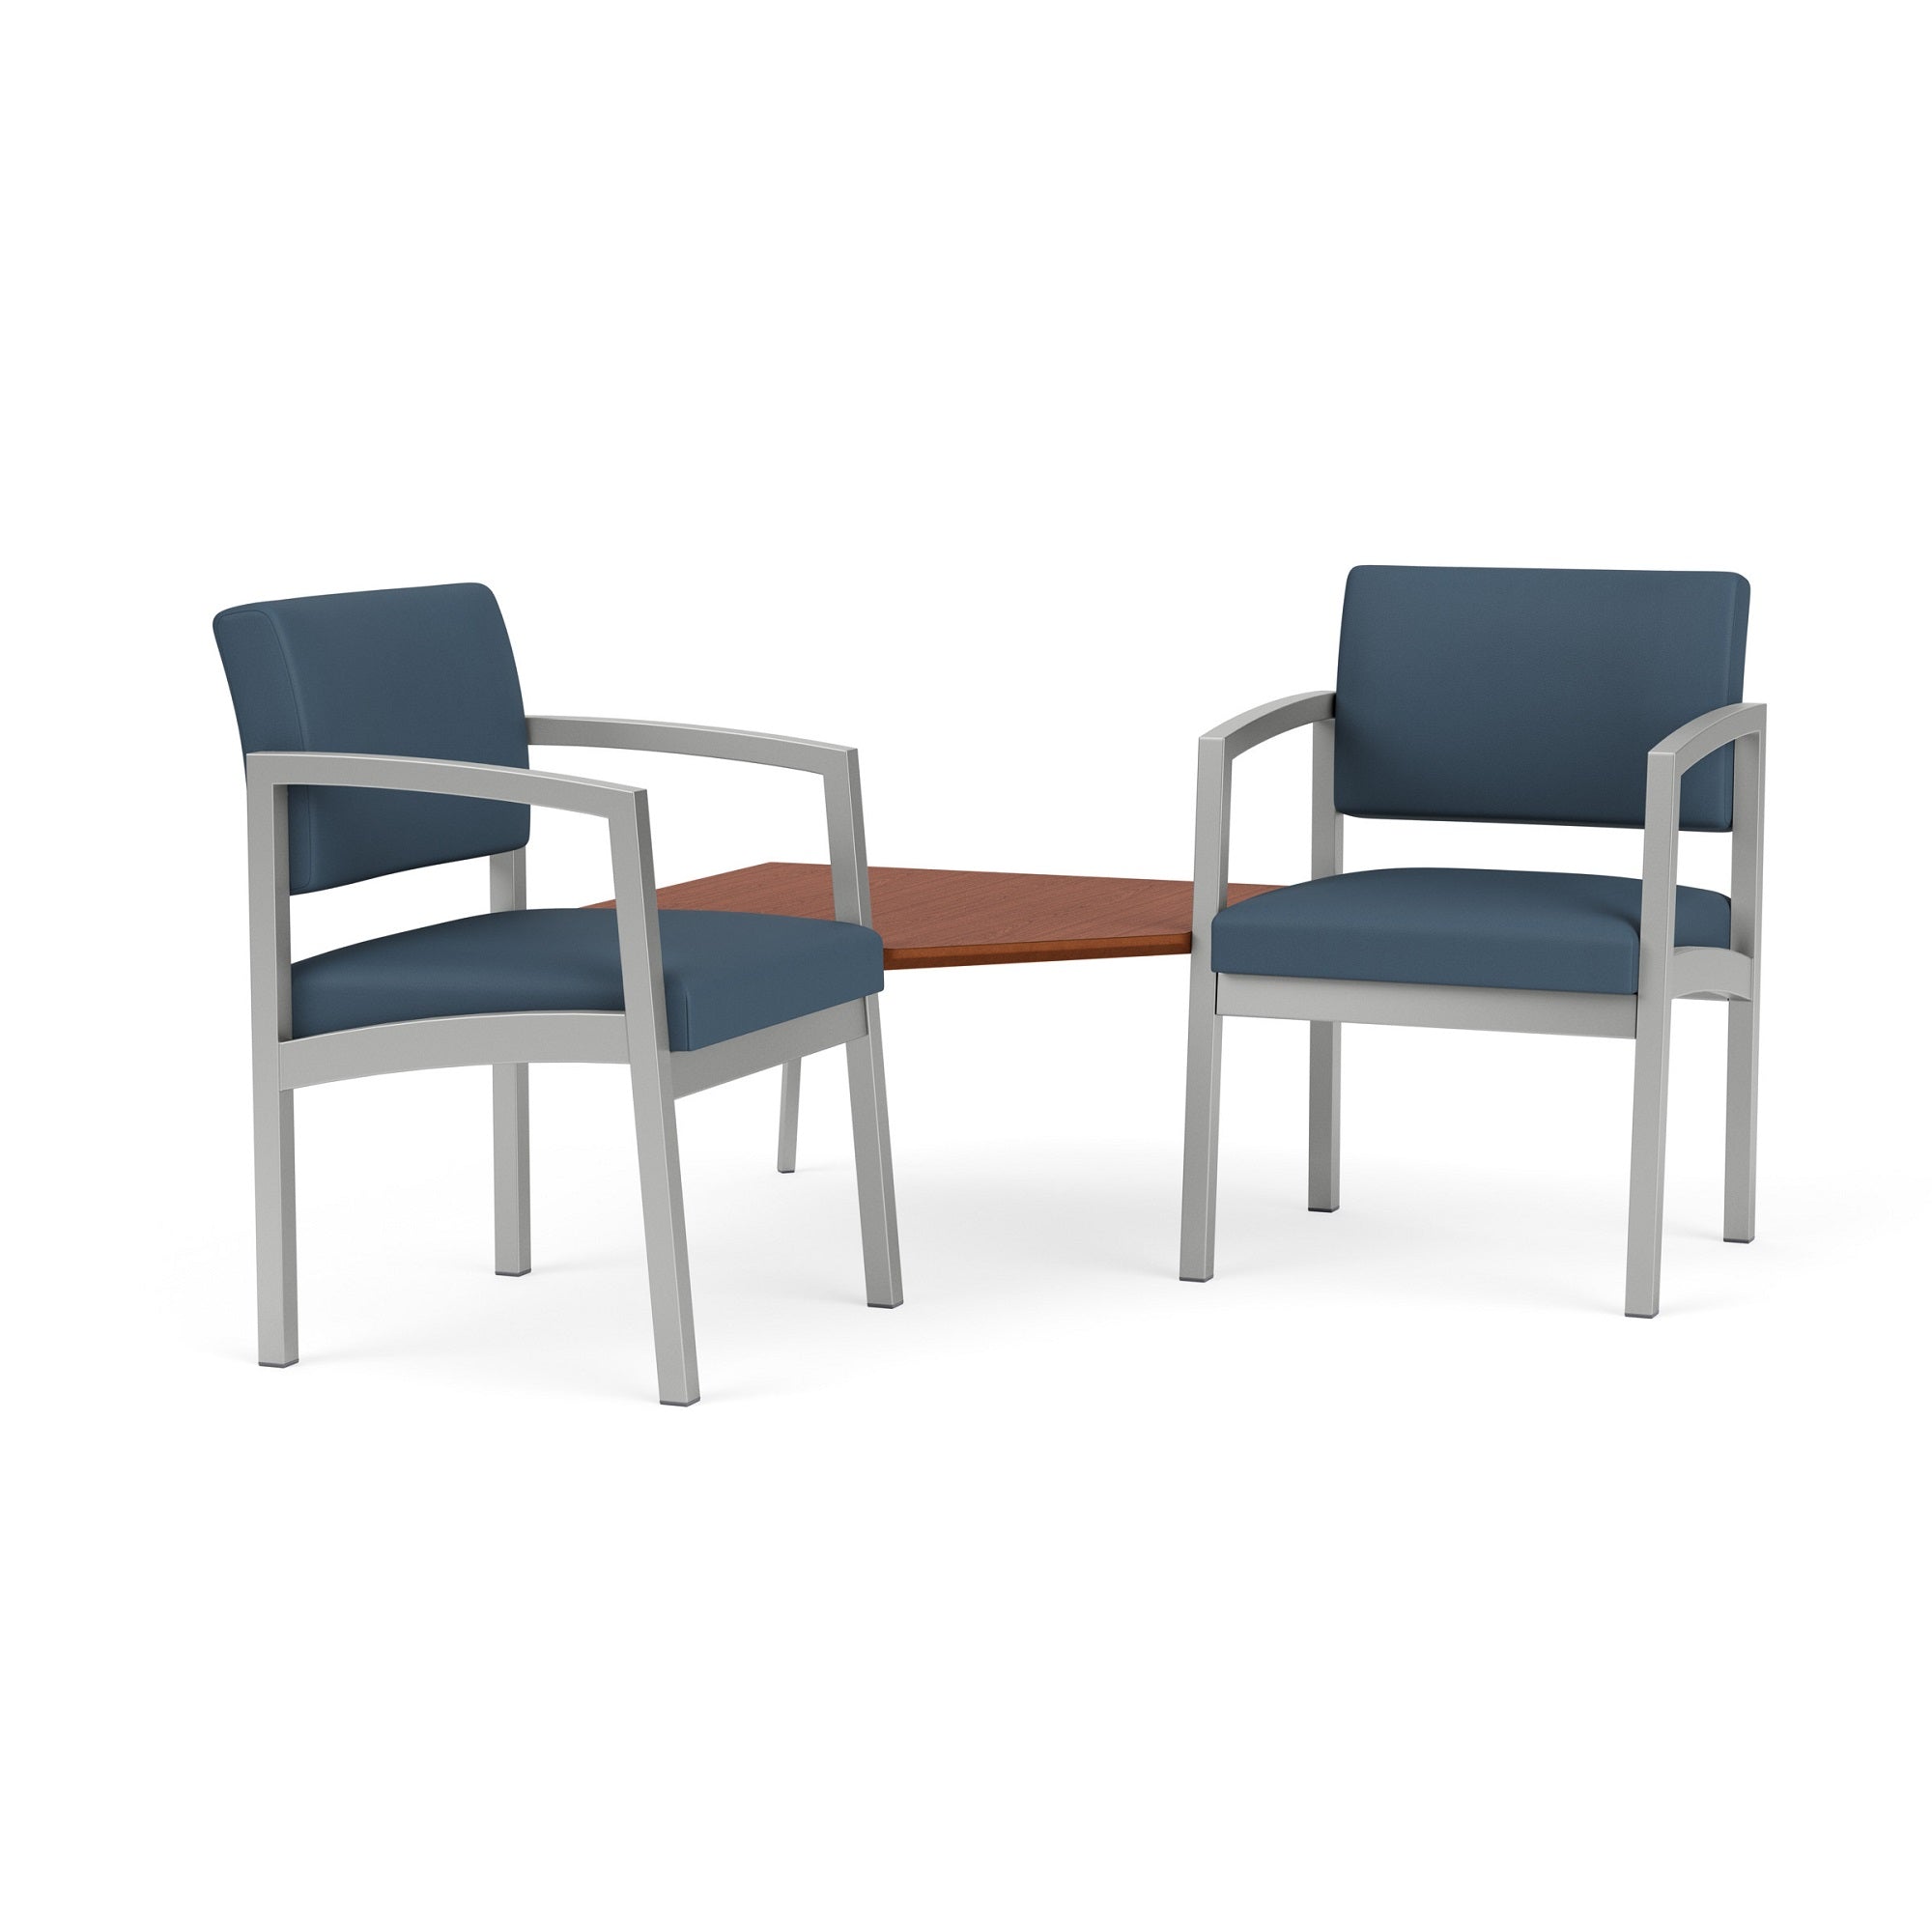 Lenox Steel Collection Reception Seating, 2 Chairs with Connecting Corner Table, Designer Fabric Upholstery, FREE SHIPPING